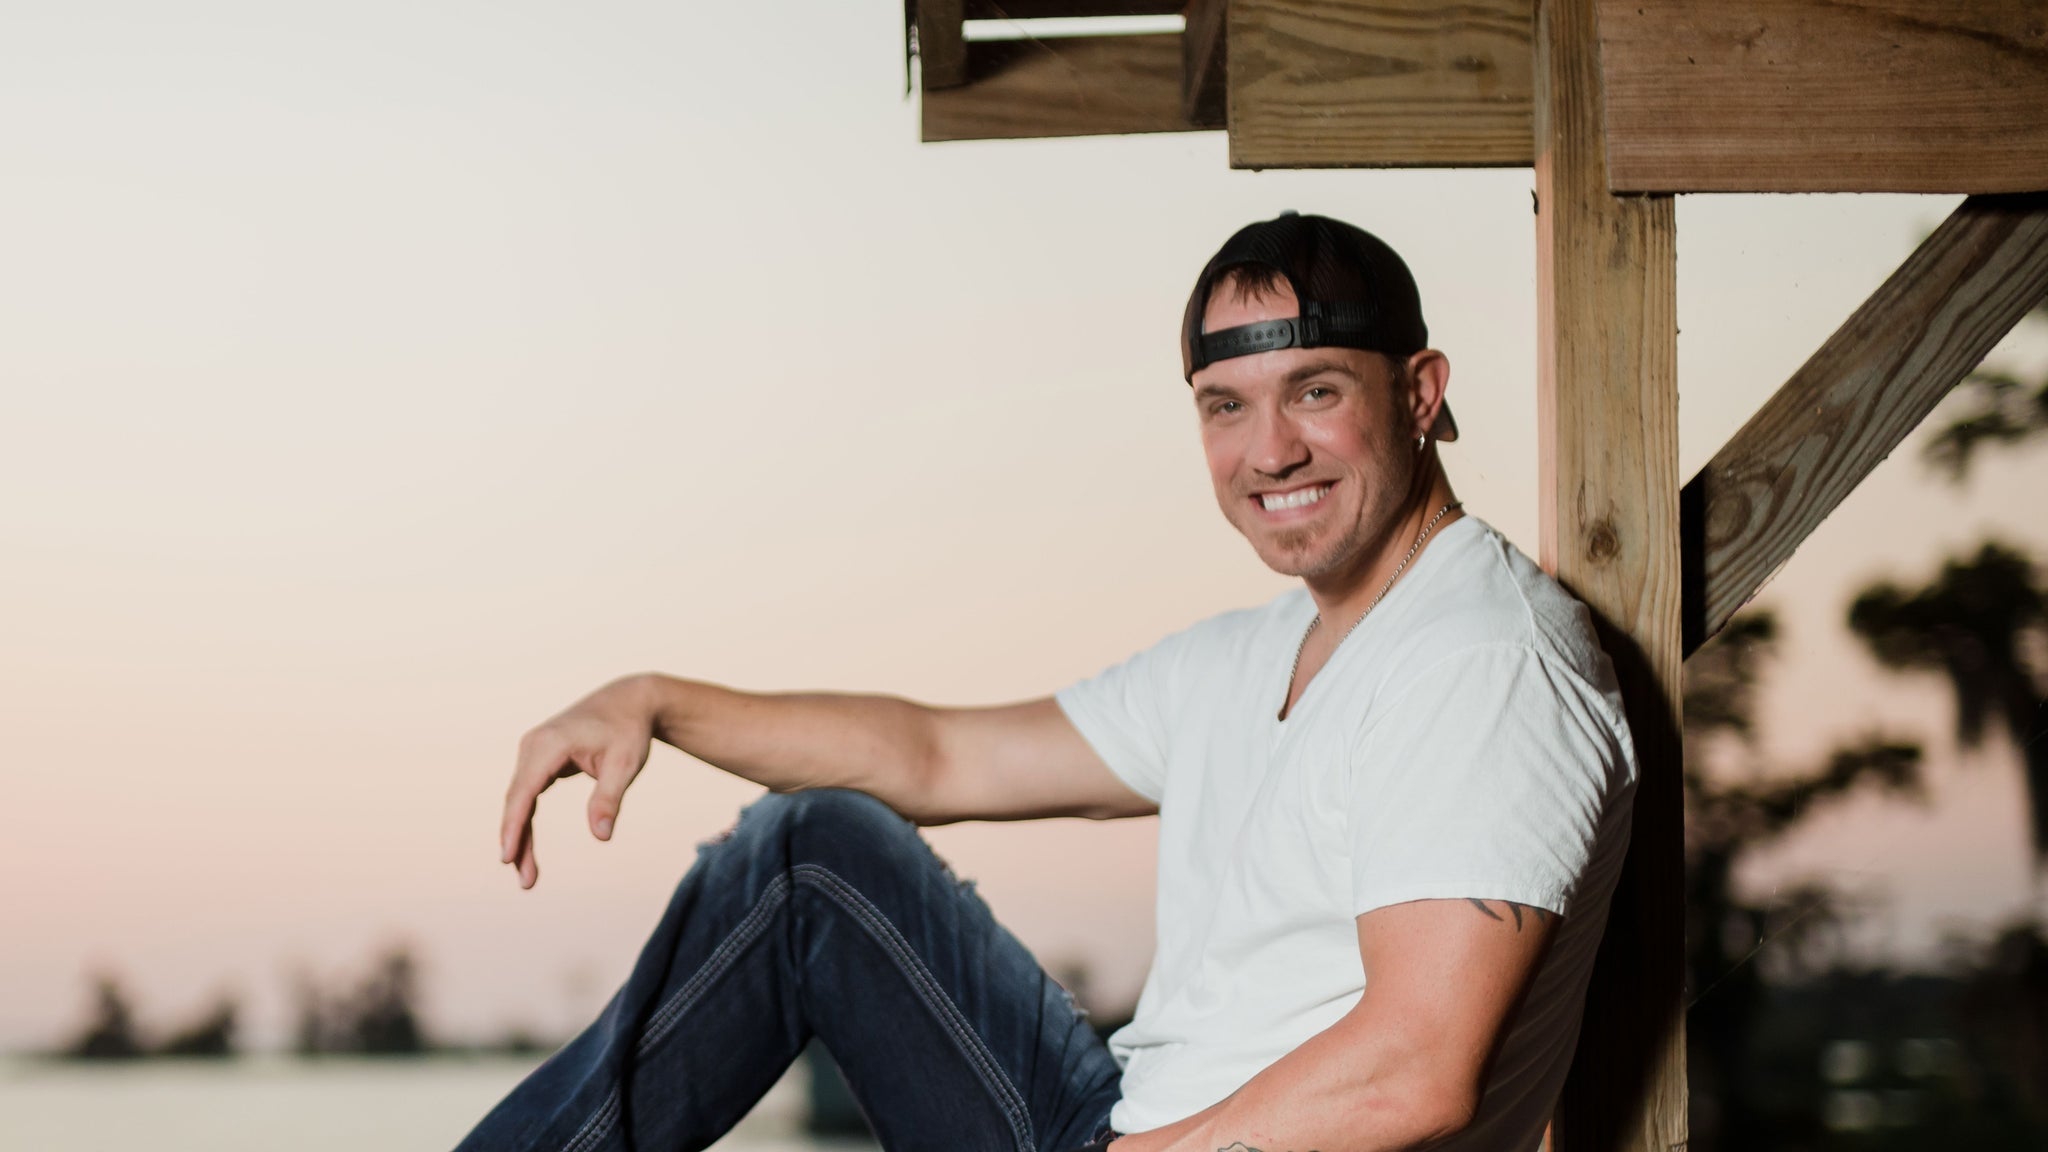 Chase Tyler Band April 01, 2023 at Texas Club in Baton Rouge, LA 9:00PM -  